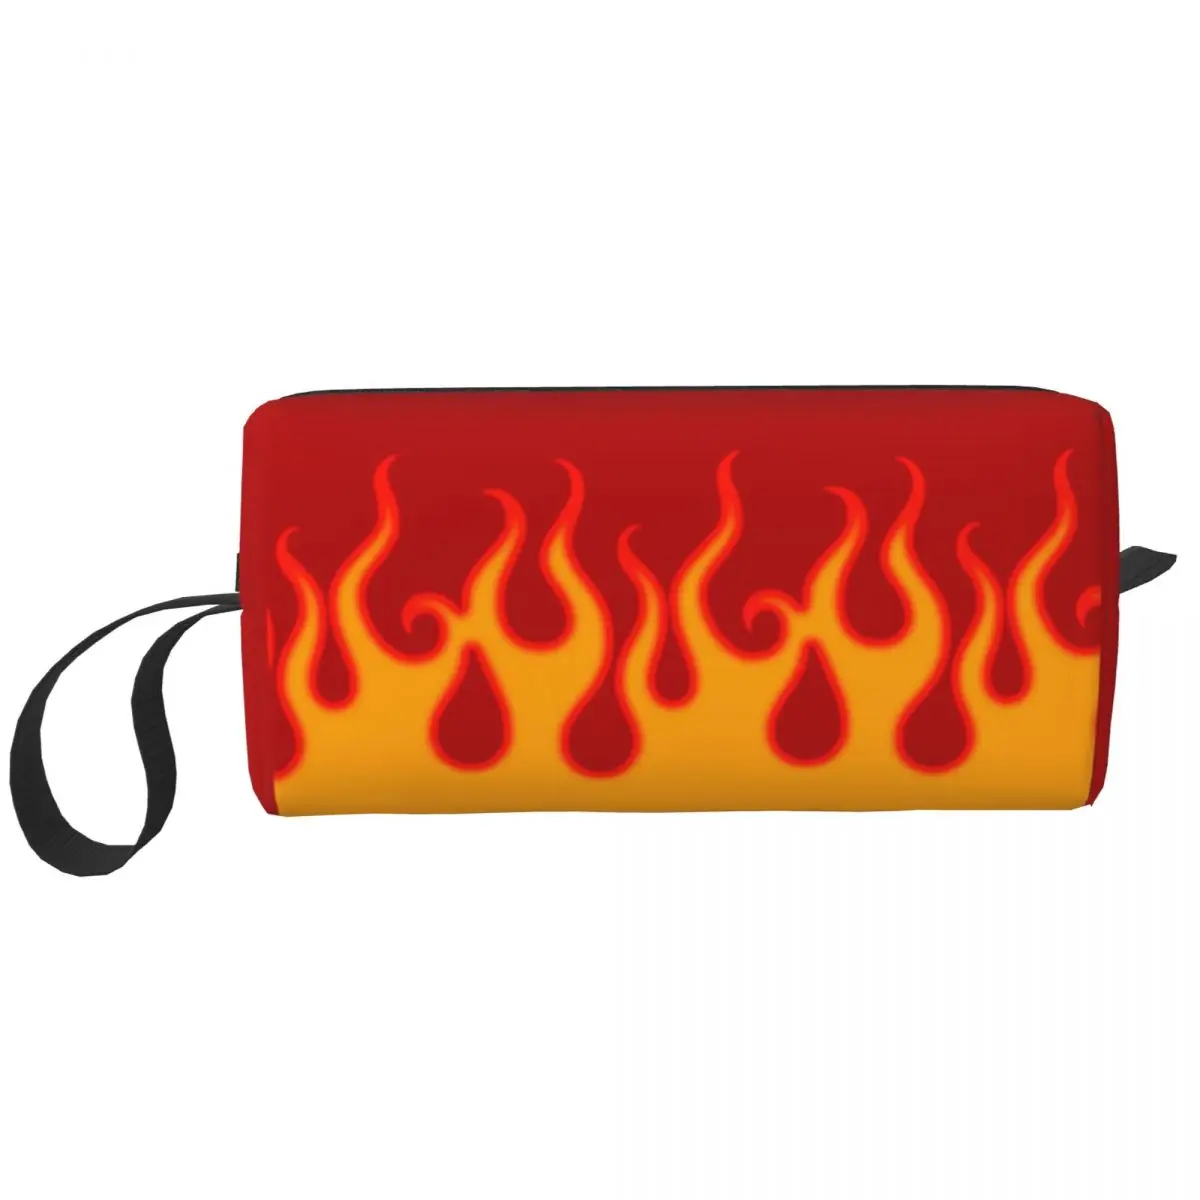 

Cute Red Hot Fire Racing Flames Travel Toiletry Bag for Women Makeup Cosmetic Bag Beauty Storage Bags Dopp Kit Box Case